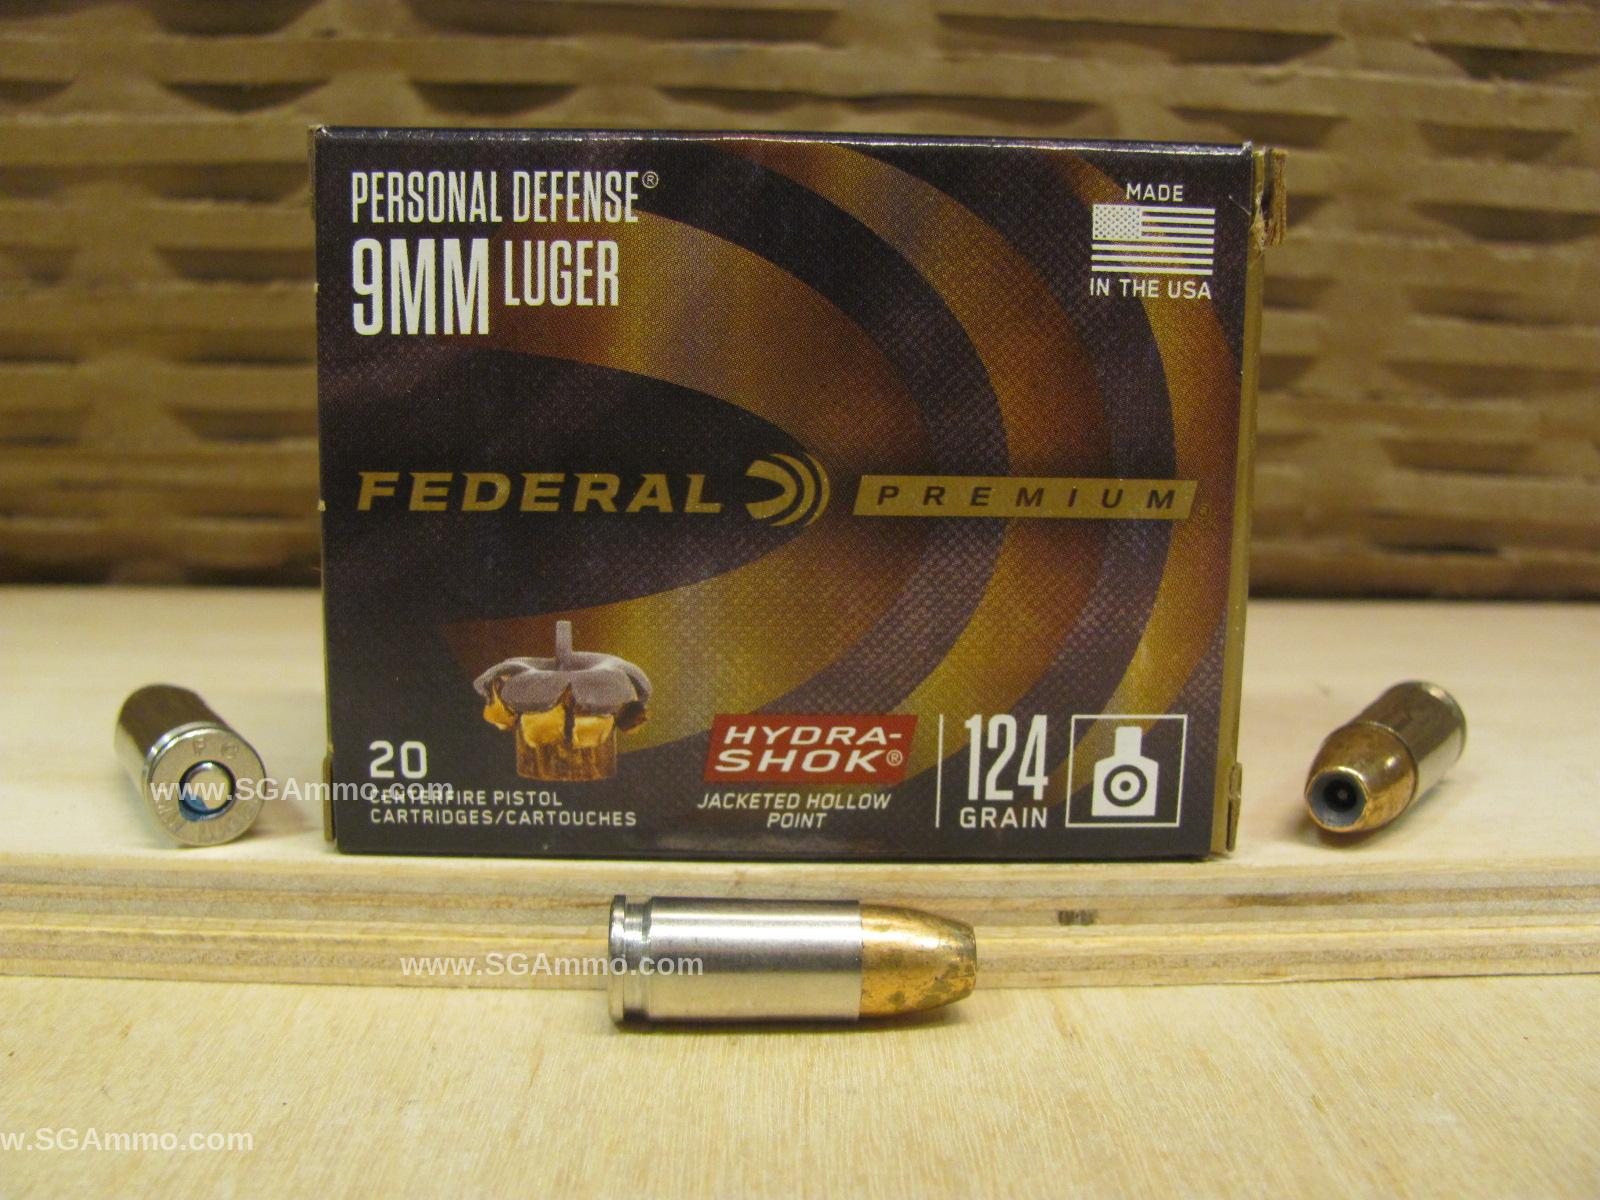 20 Round Box - 9mm Luger Federal Hydra-Shok Hollow Point 124 Grain Ammo - P9HS1